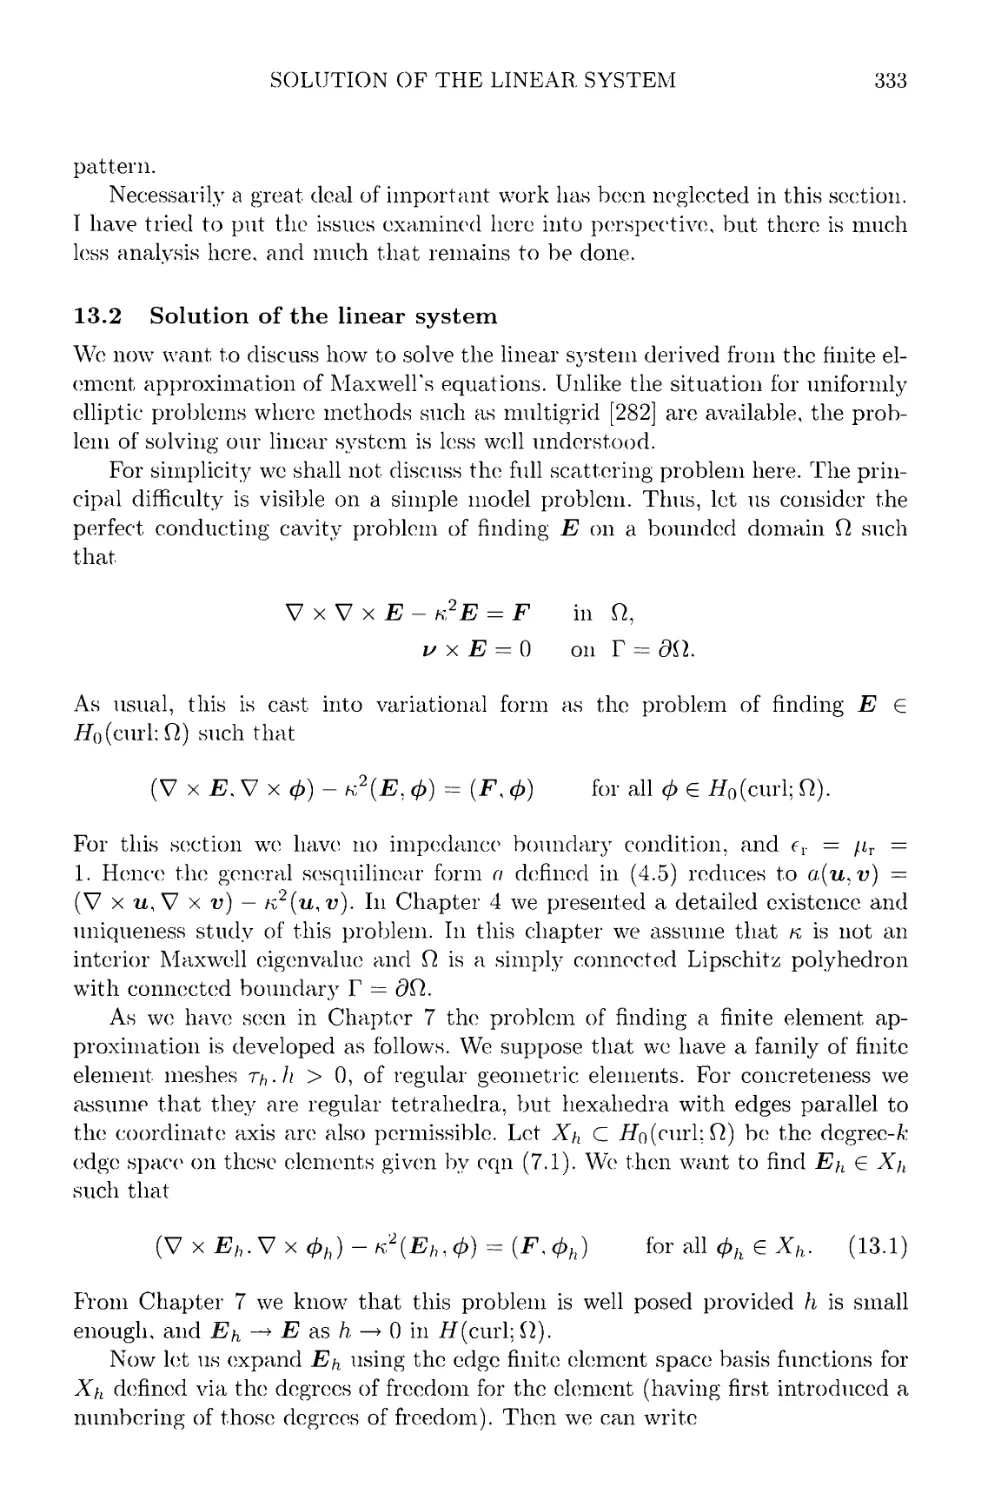 13.2 Solution of the linear system